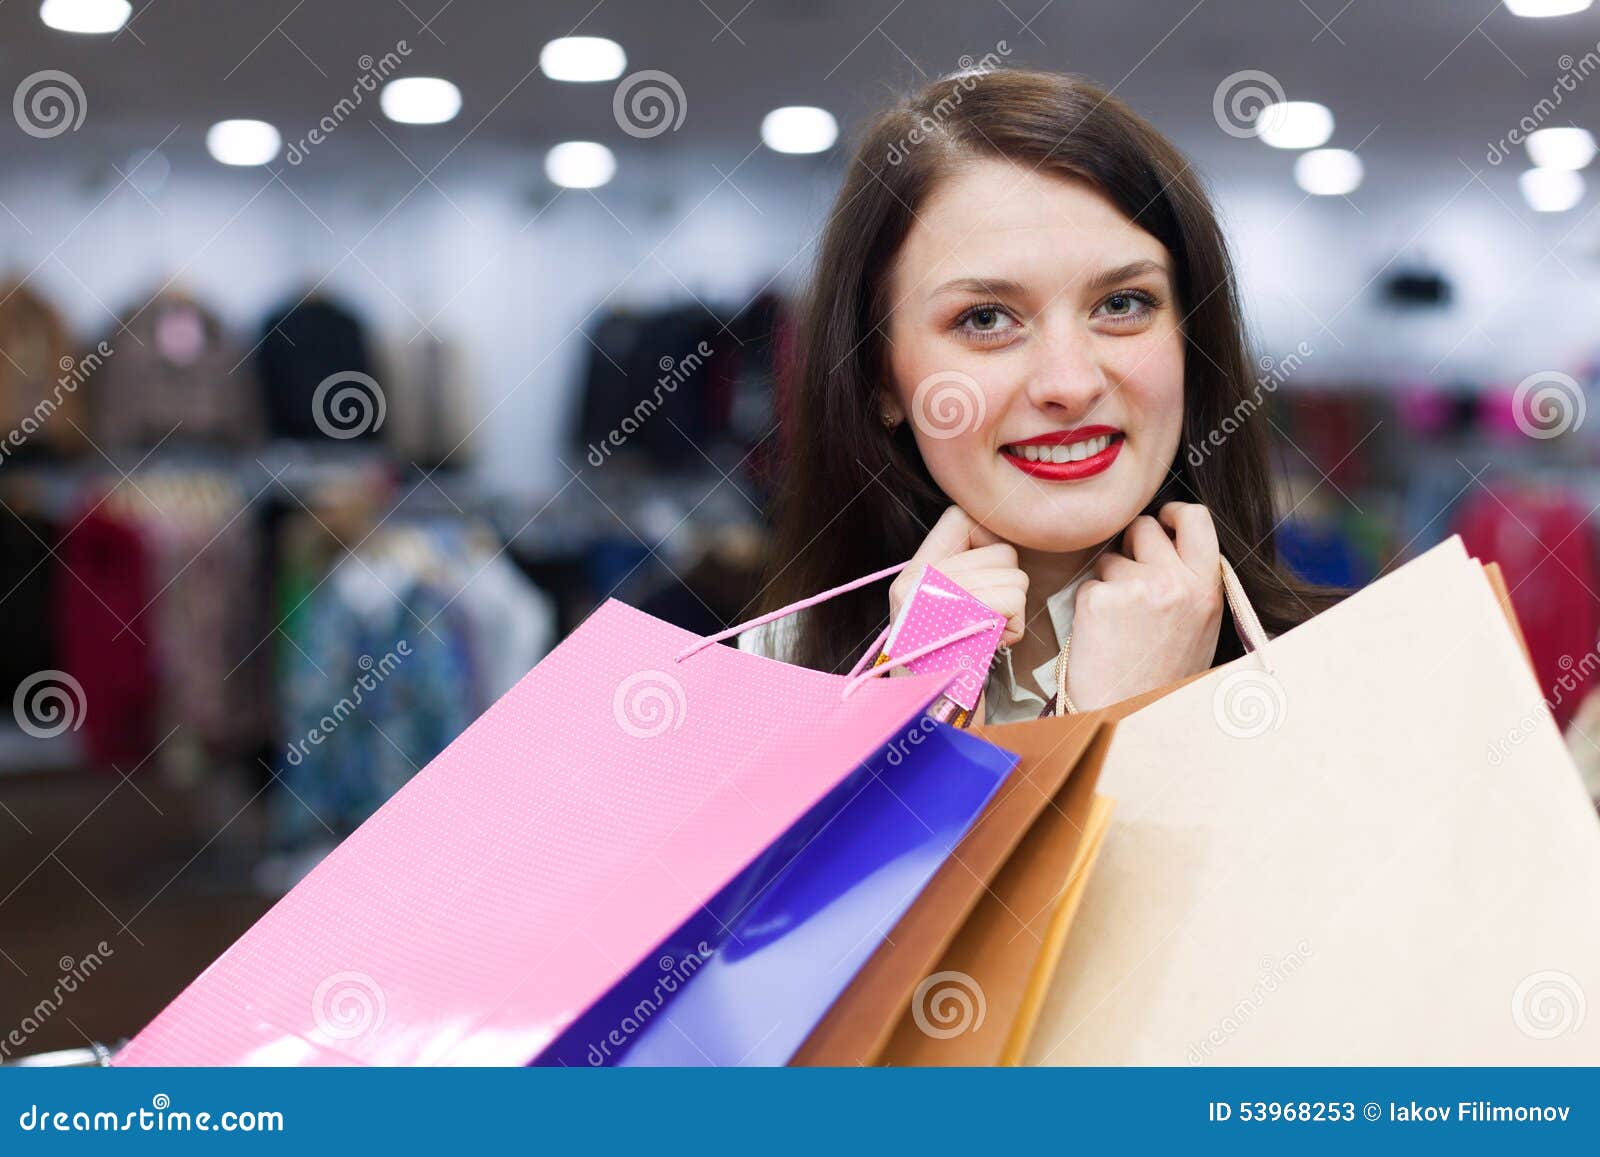 Young Woman with a Lot of Shopping Bags Stock Image - Image of ...